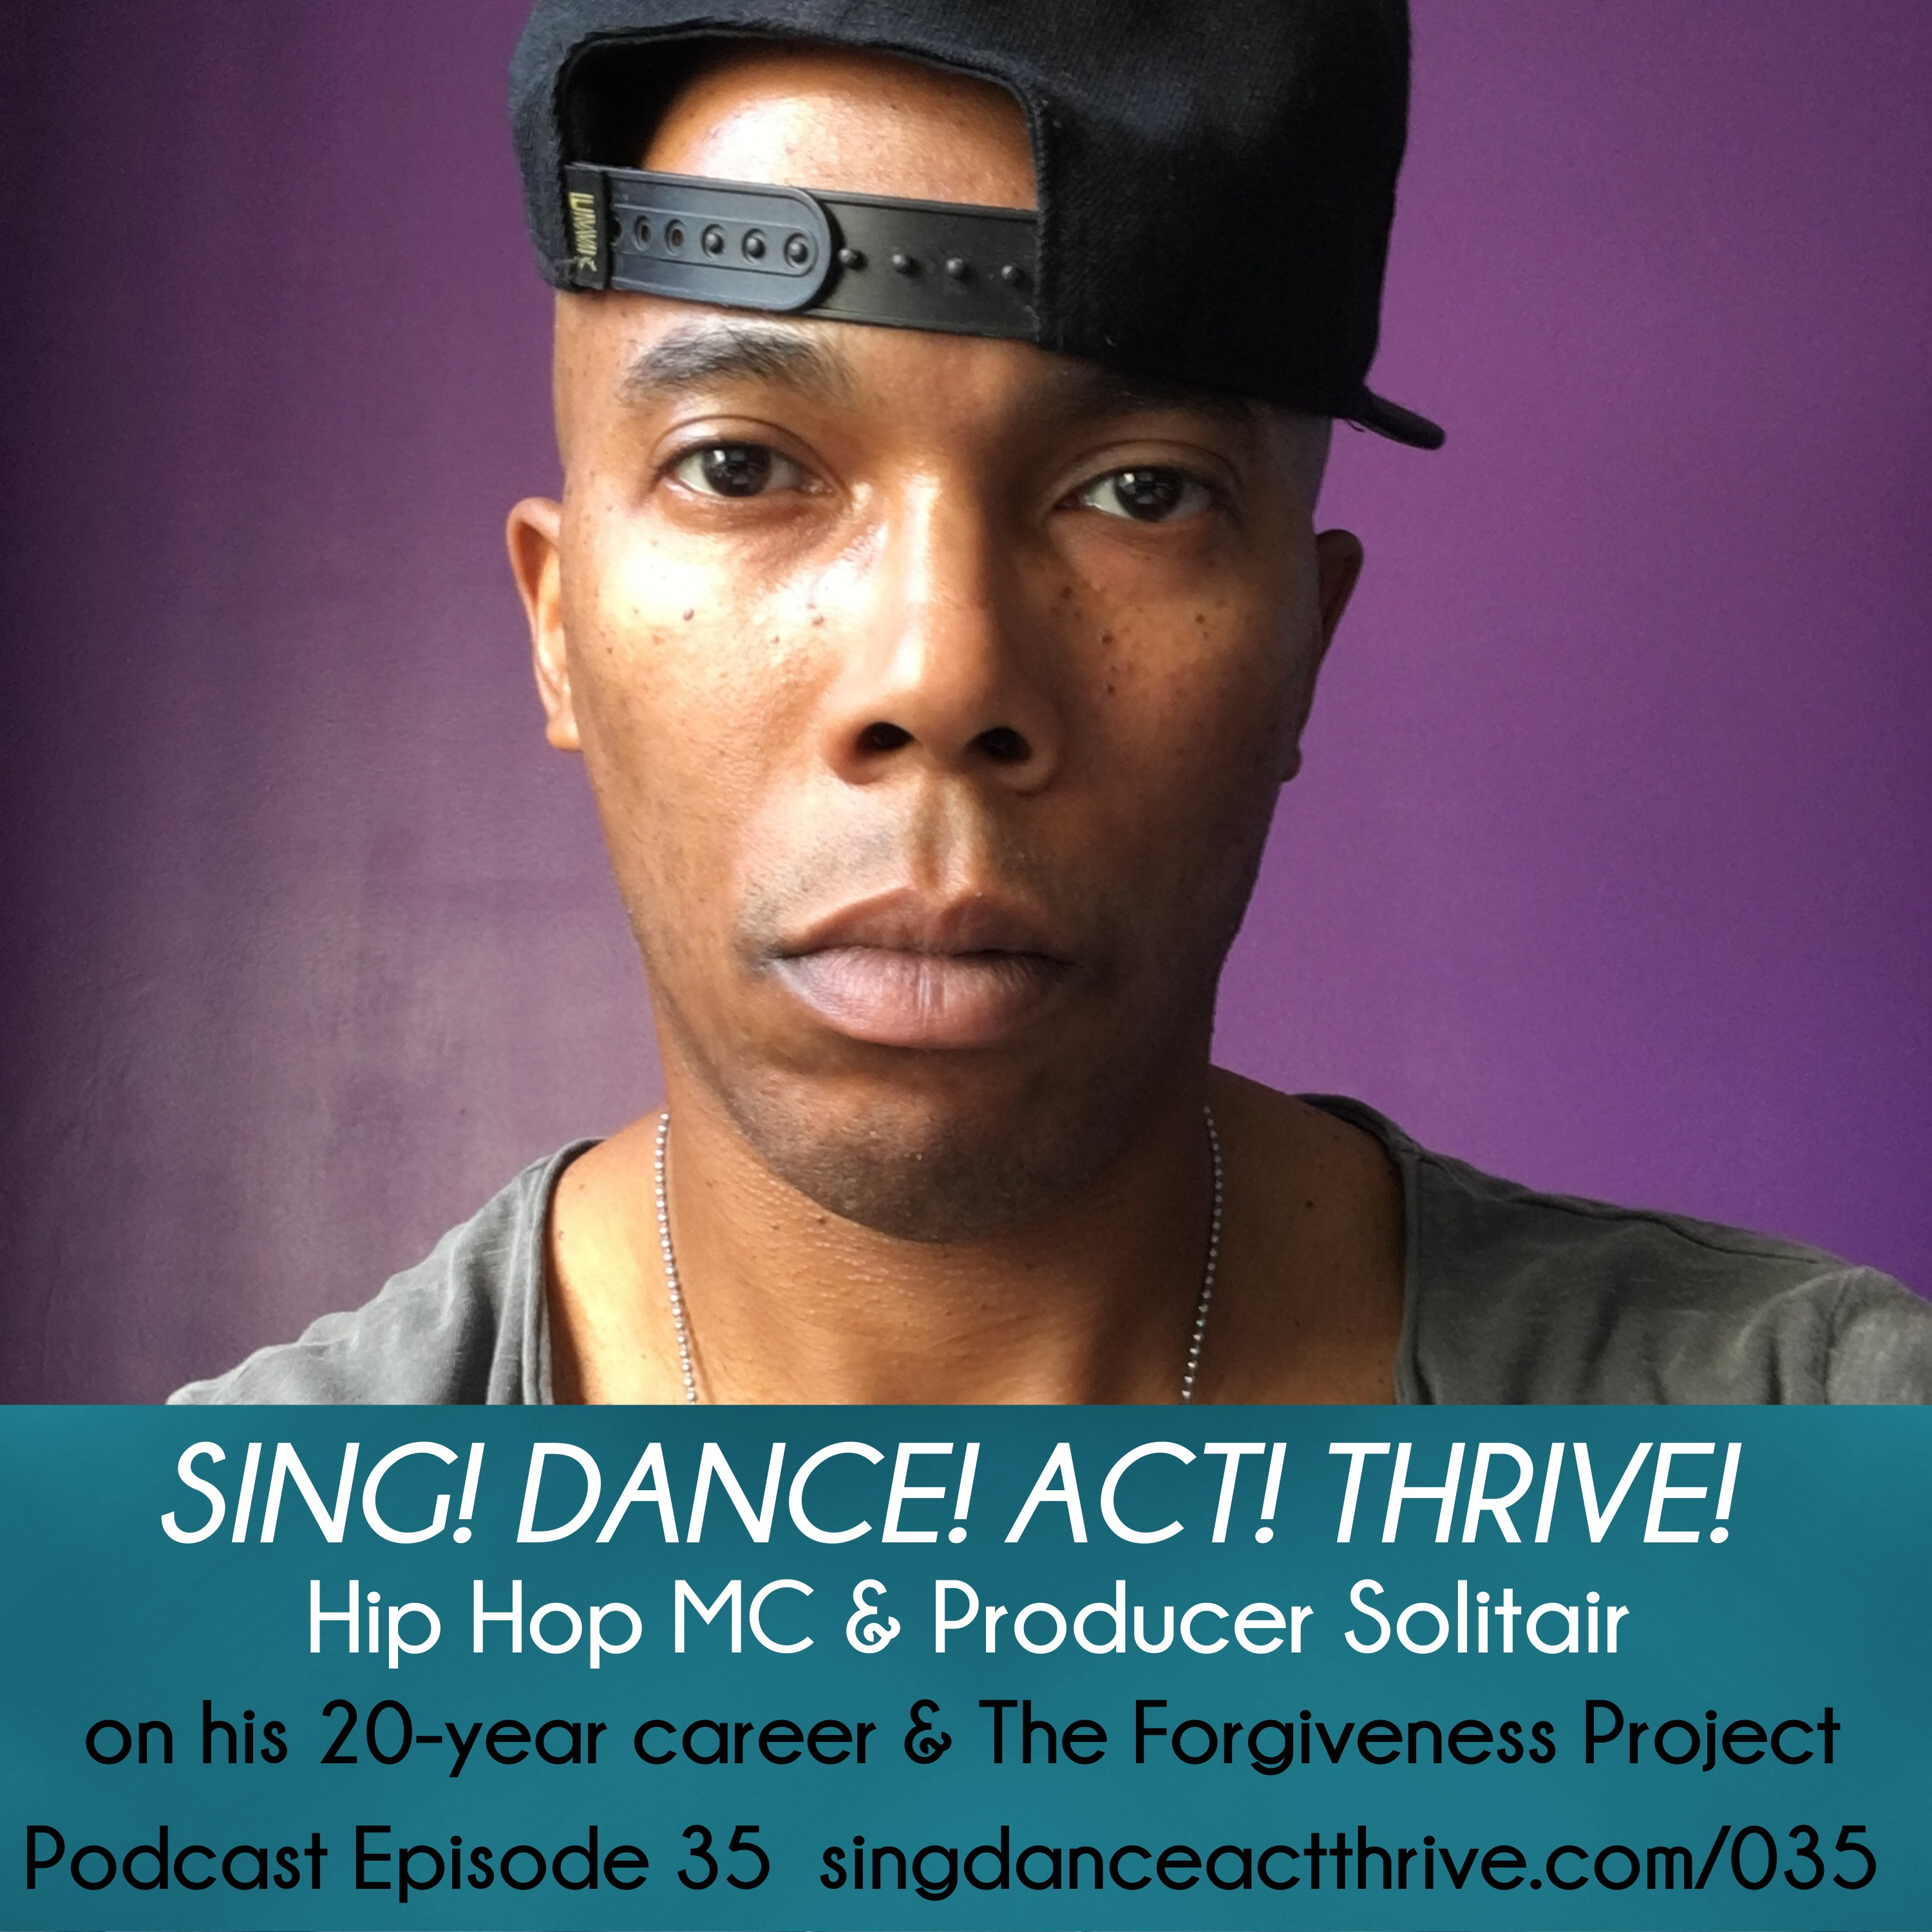 Hip Hop MC & Producer Solitair on his 20-Year Career & The Forgiveness Project